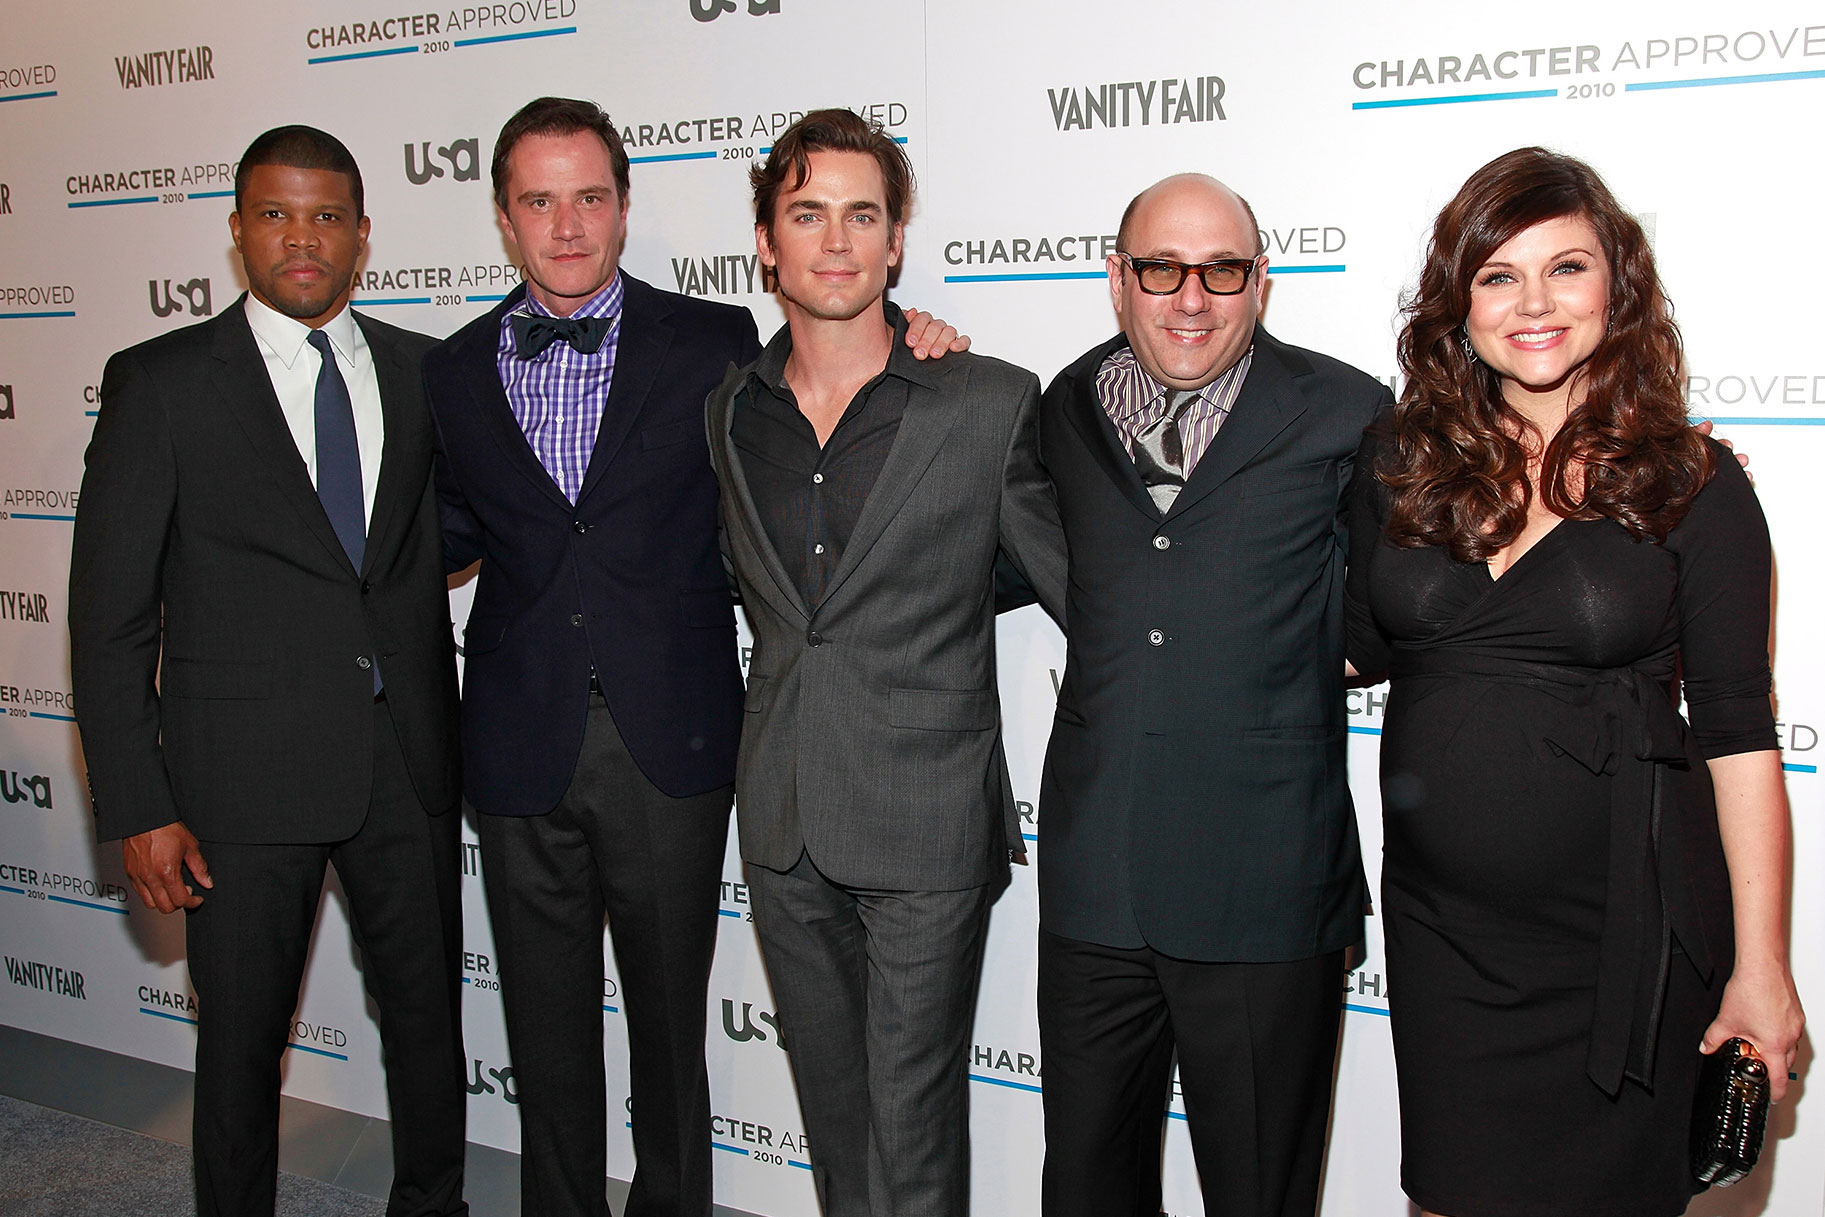 The cast of White Collar